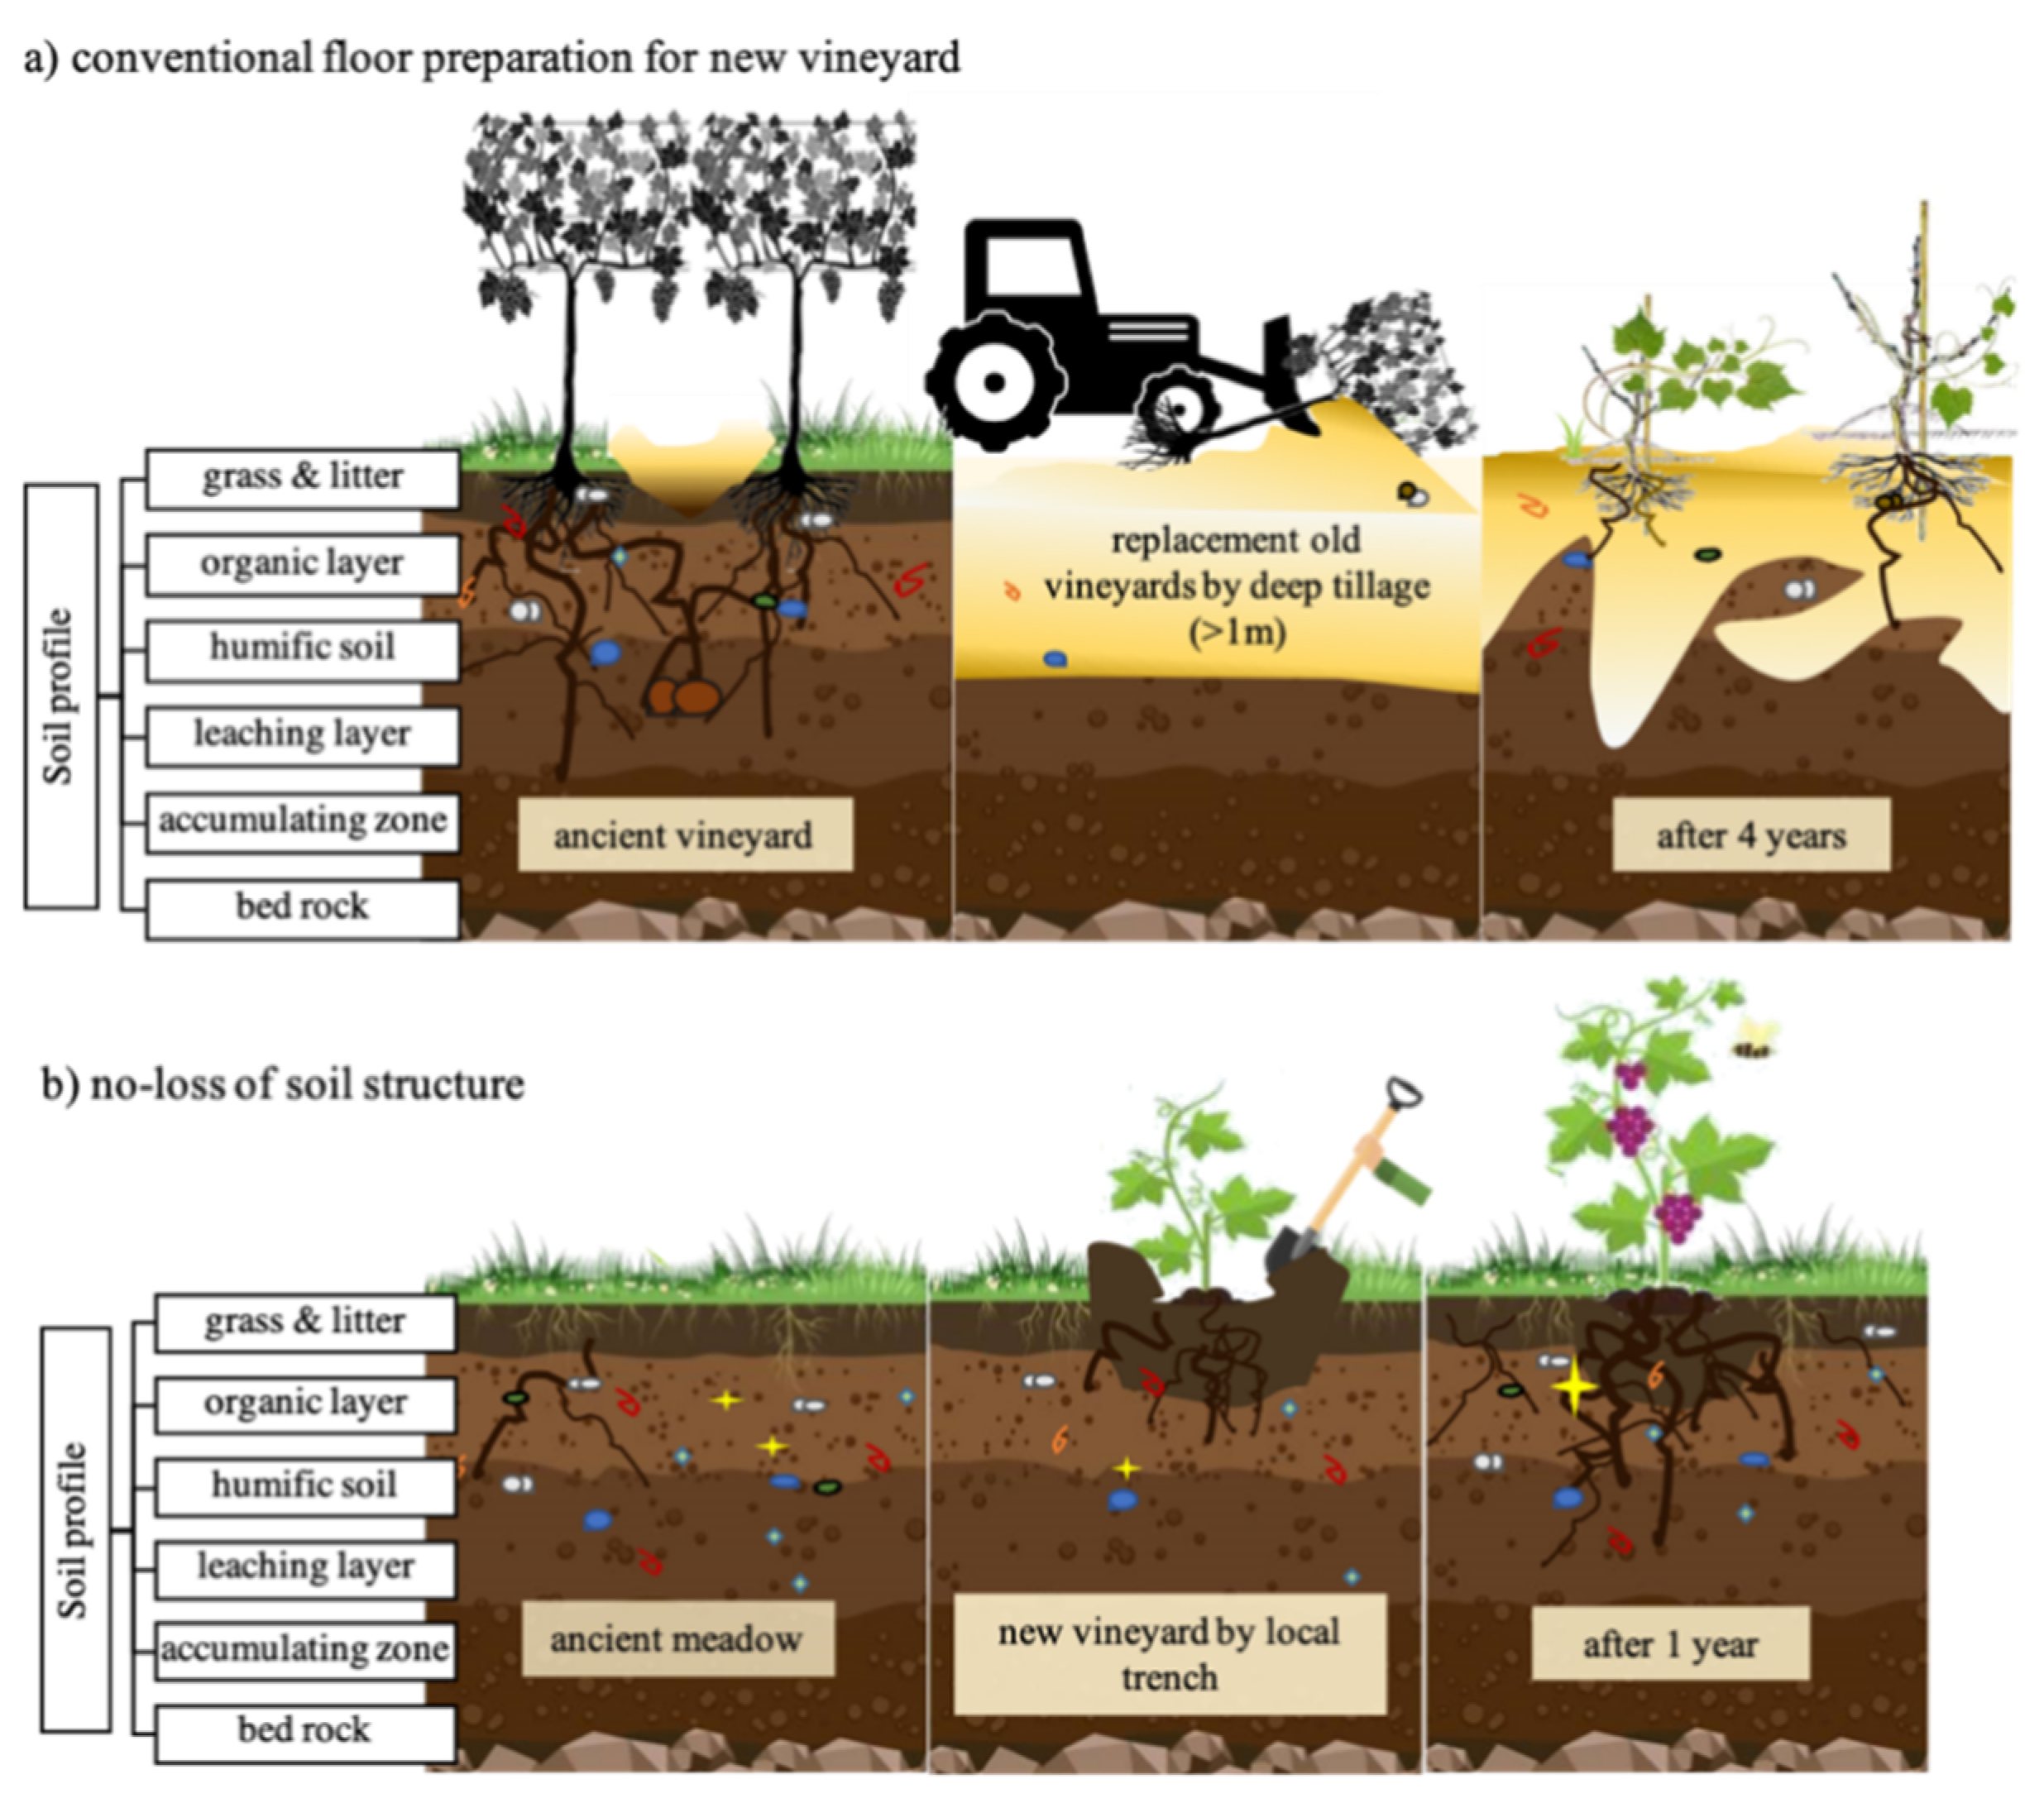 Land | Free Full-Text | Effects of Land-Use Change on Soil Functionality  and Biodiversity: Toward Sustainable Planning of New Vineyards | HTML